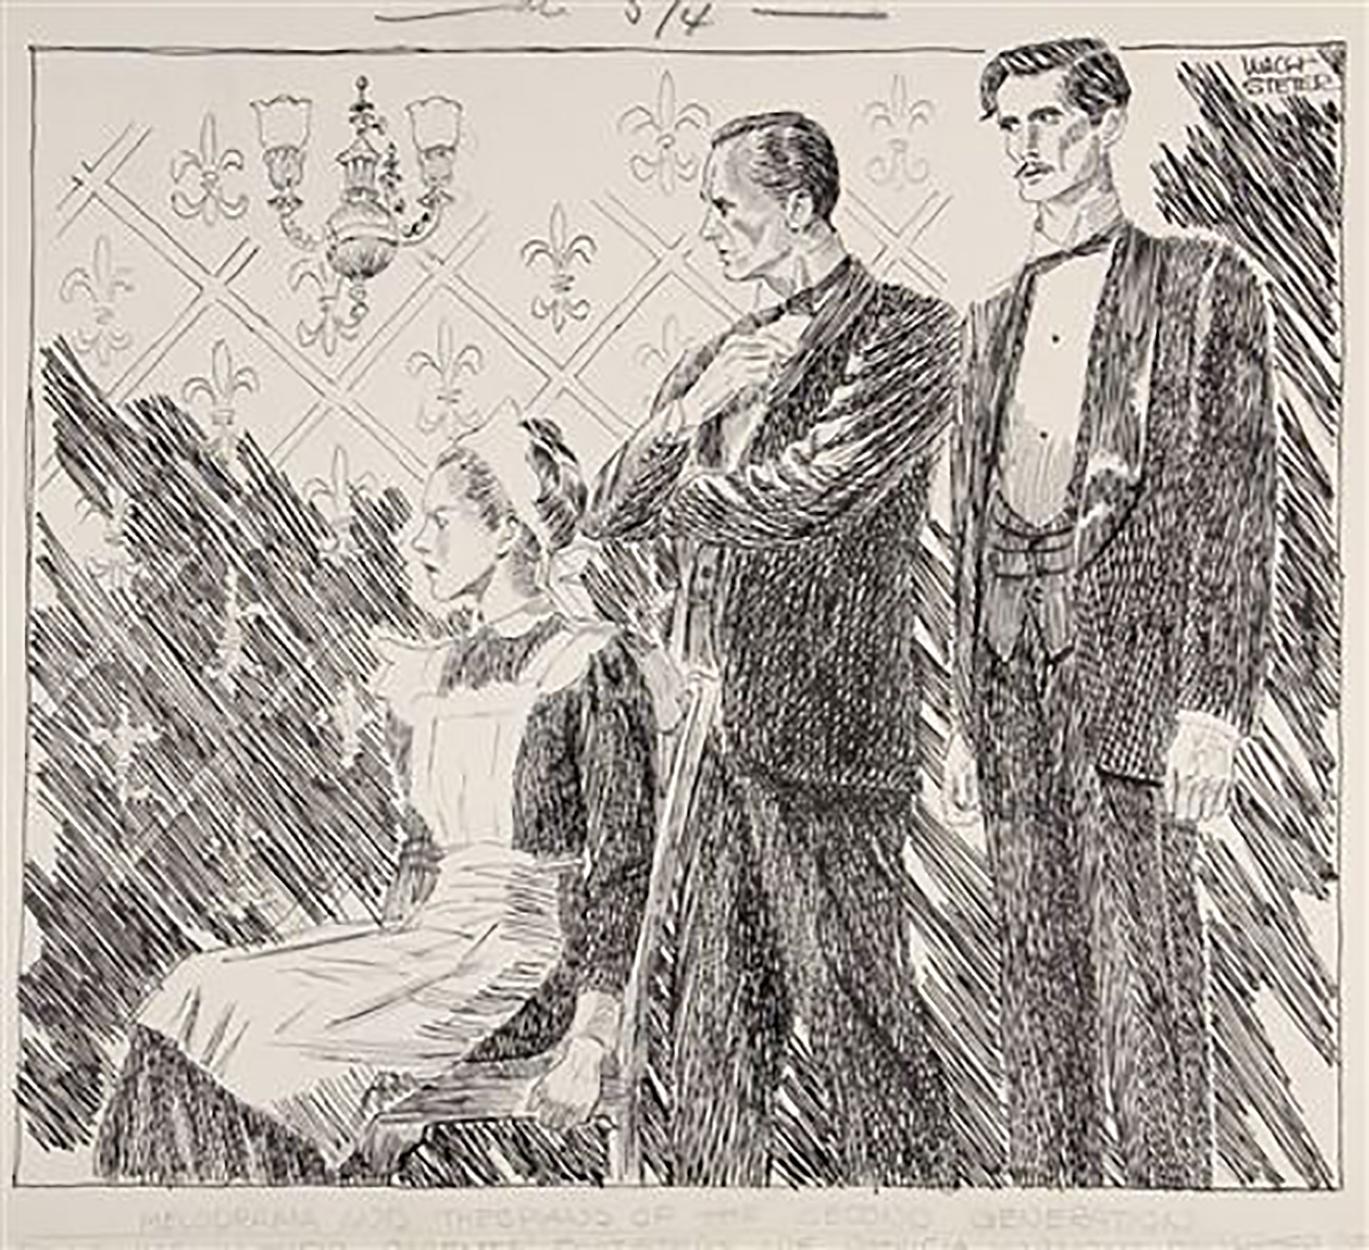 George Wachsteter Figurative Art - 1947 Broadway Production of J. B. Priestley's "An Inspector Calls"